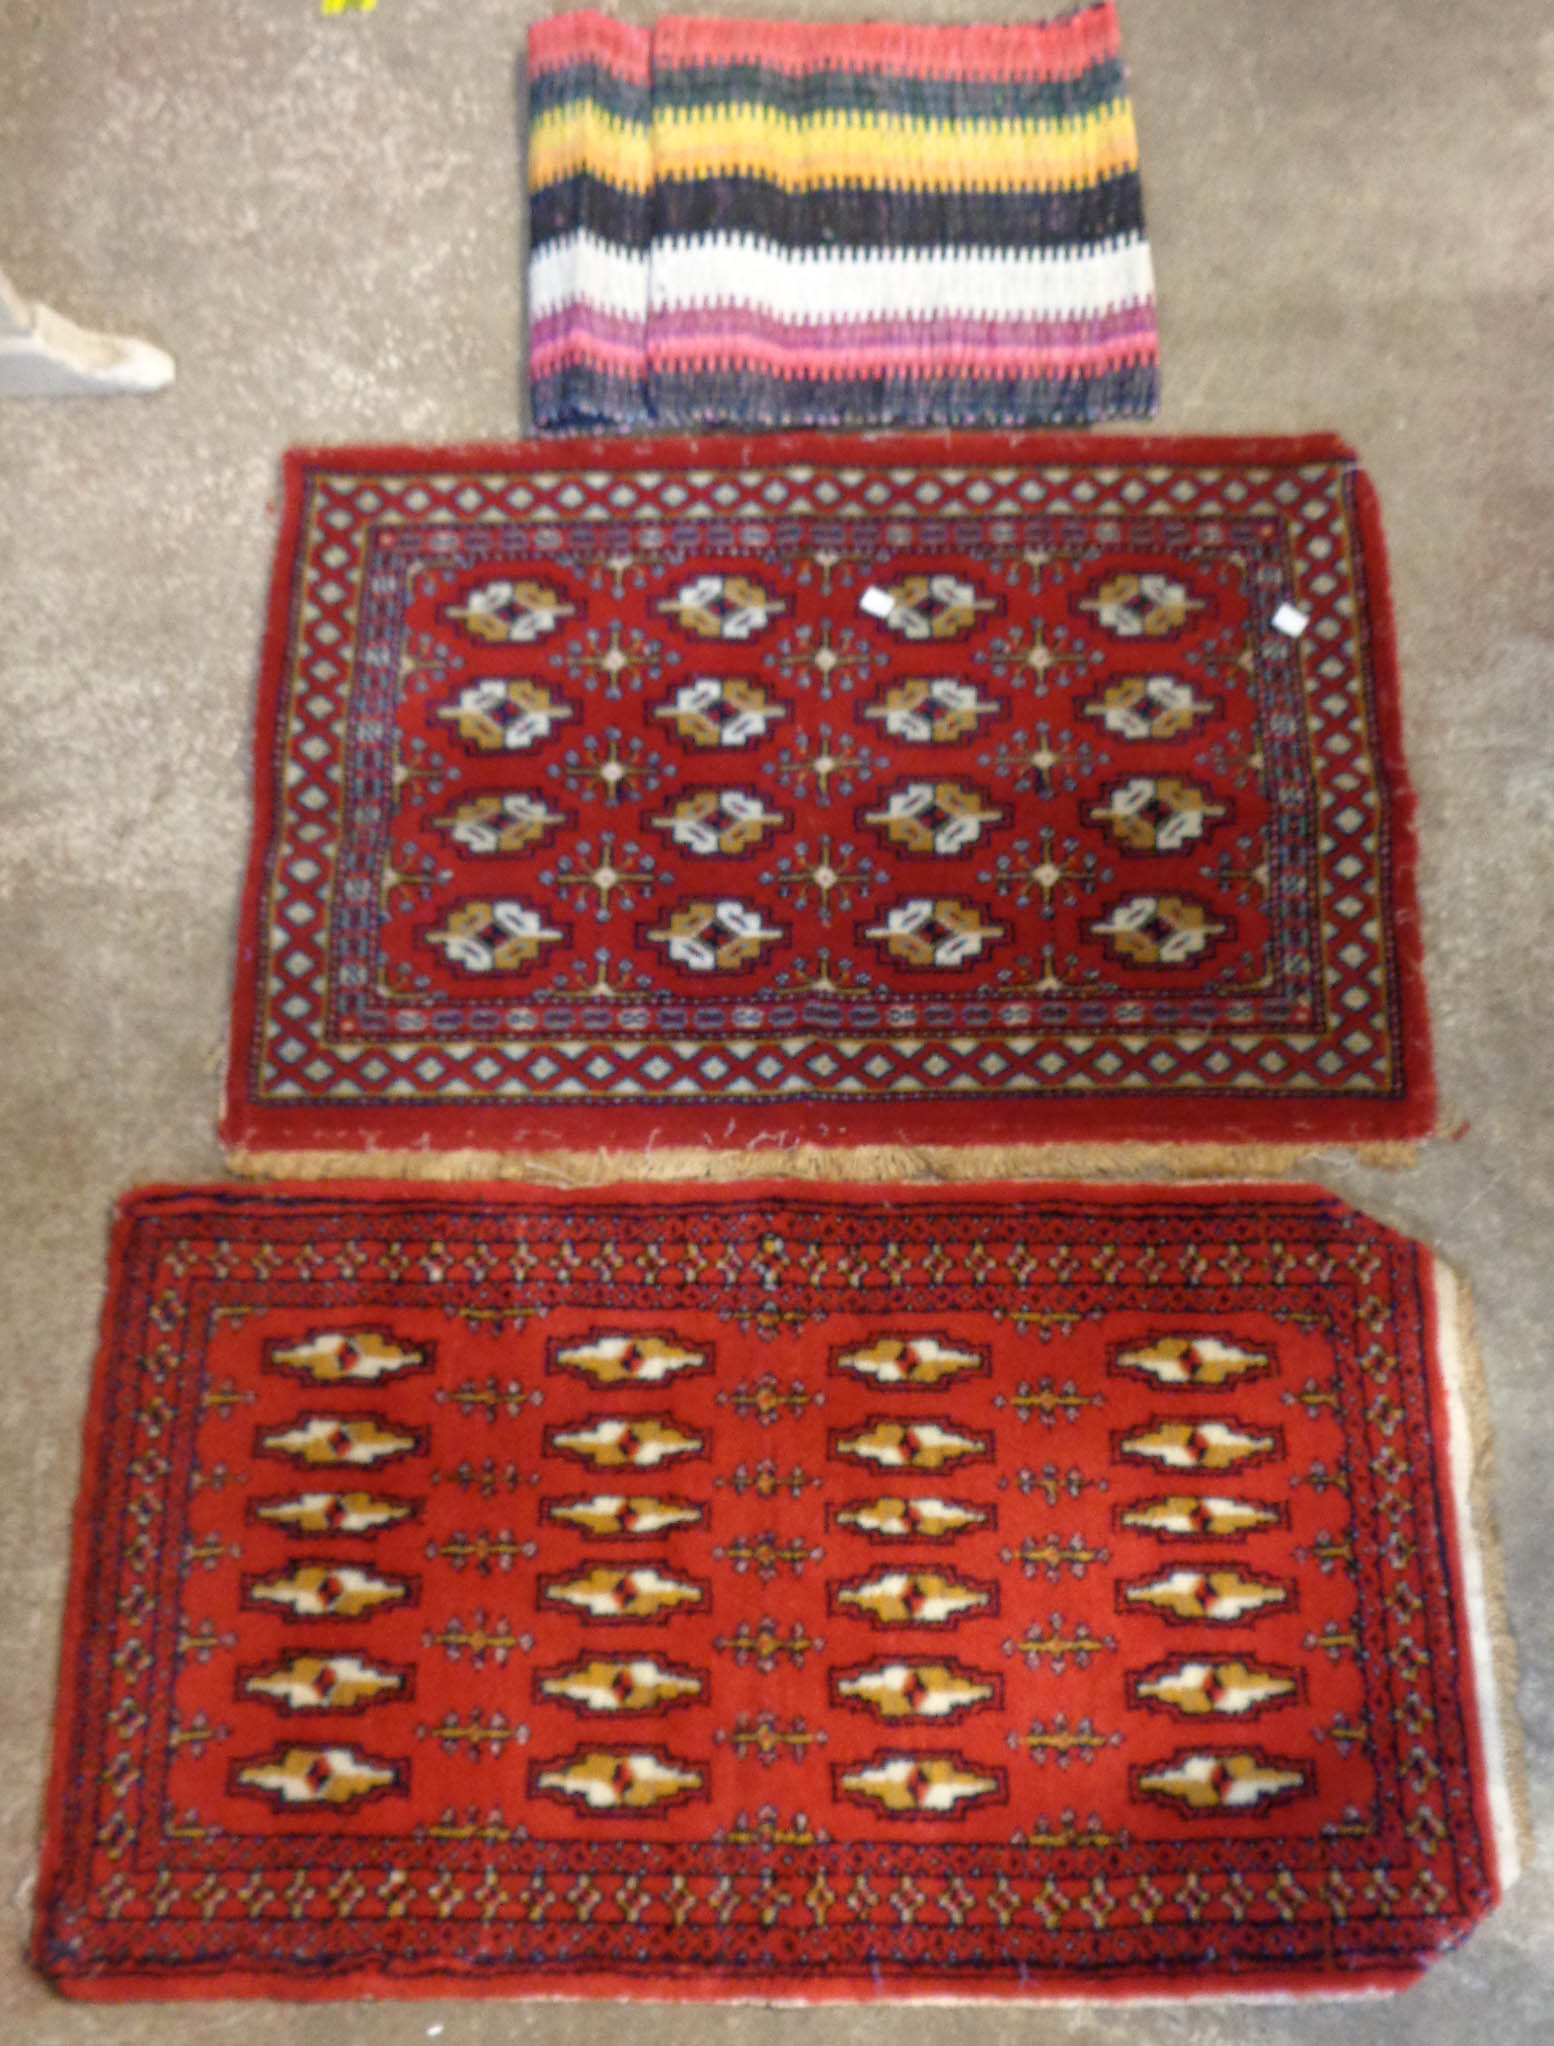 Two small Persian rugs and a saddlebag